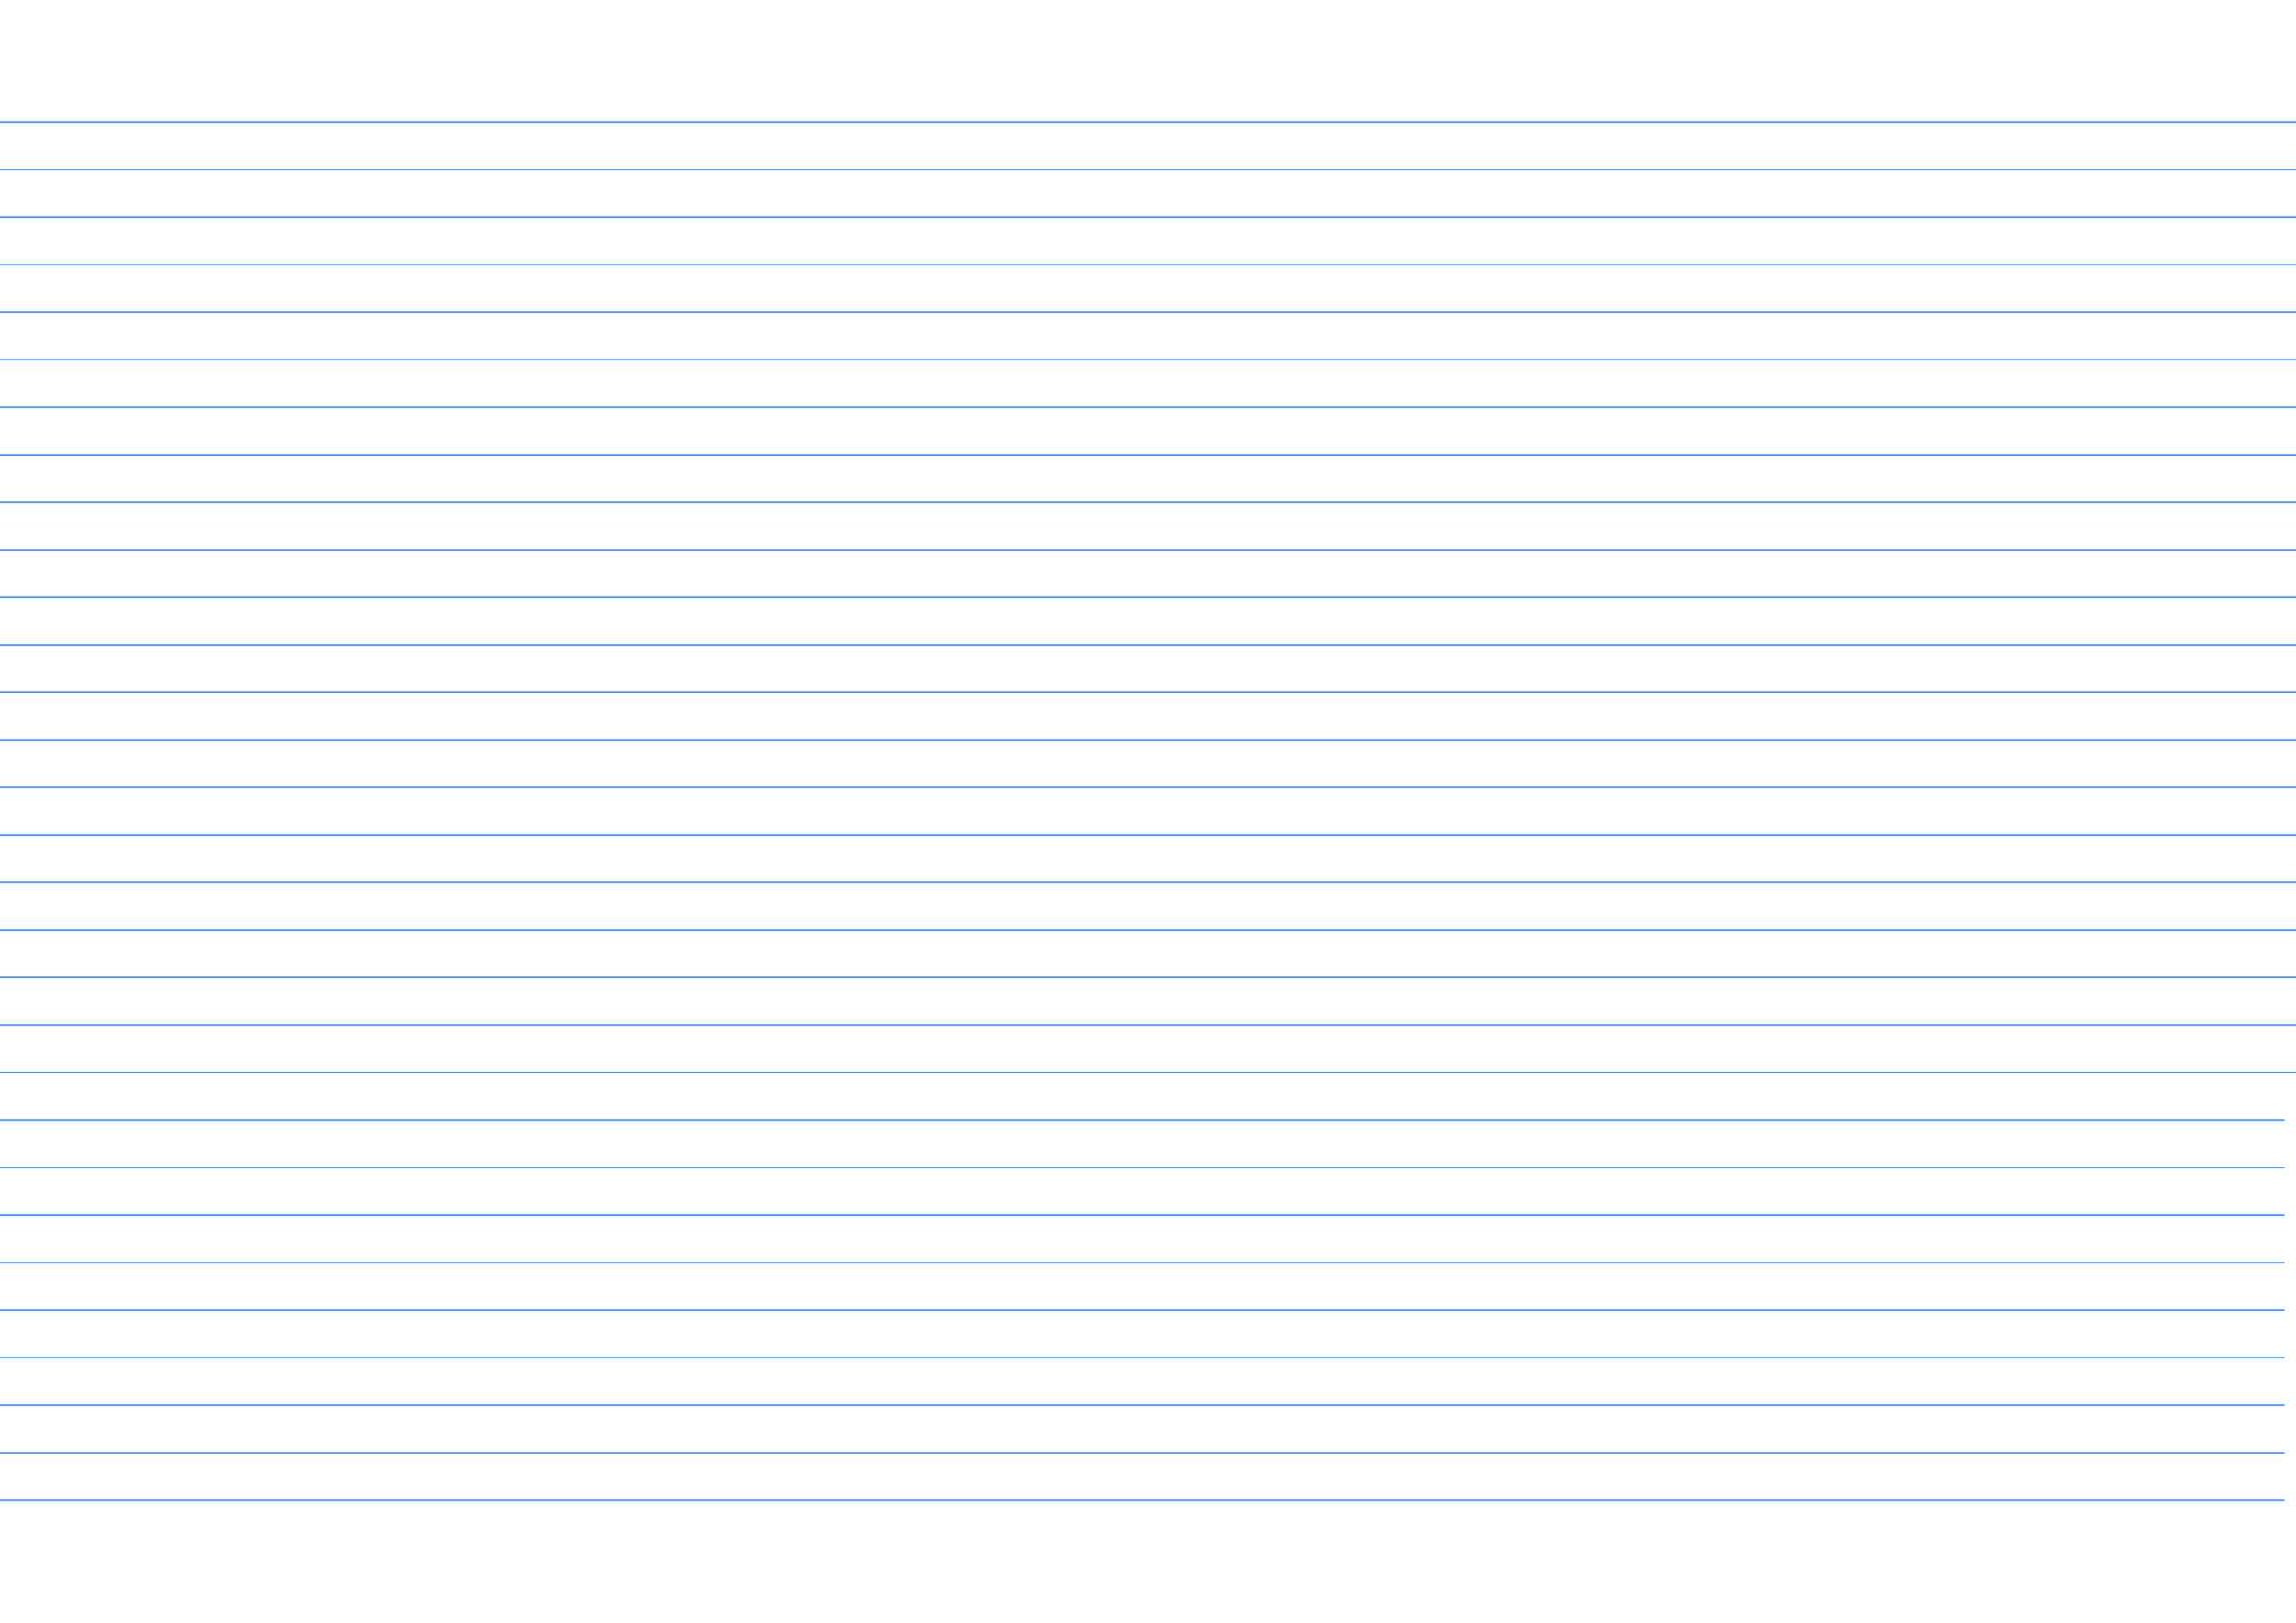 Notebook Paper Template For Word - Calep.midnightpig.co Regarding Notebook Paper Template For Word 2010